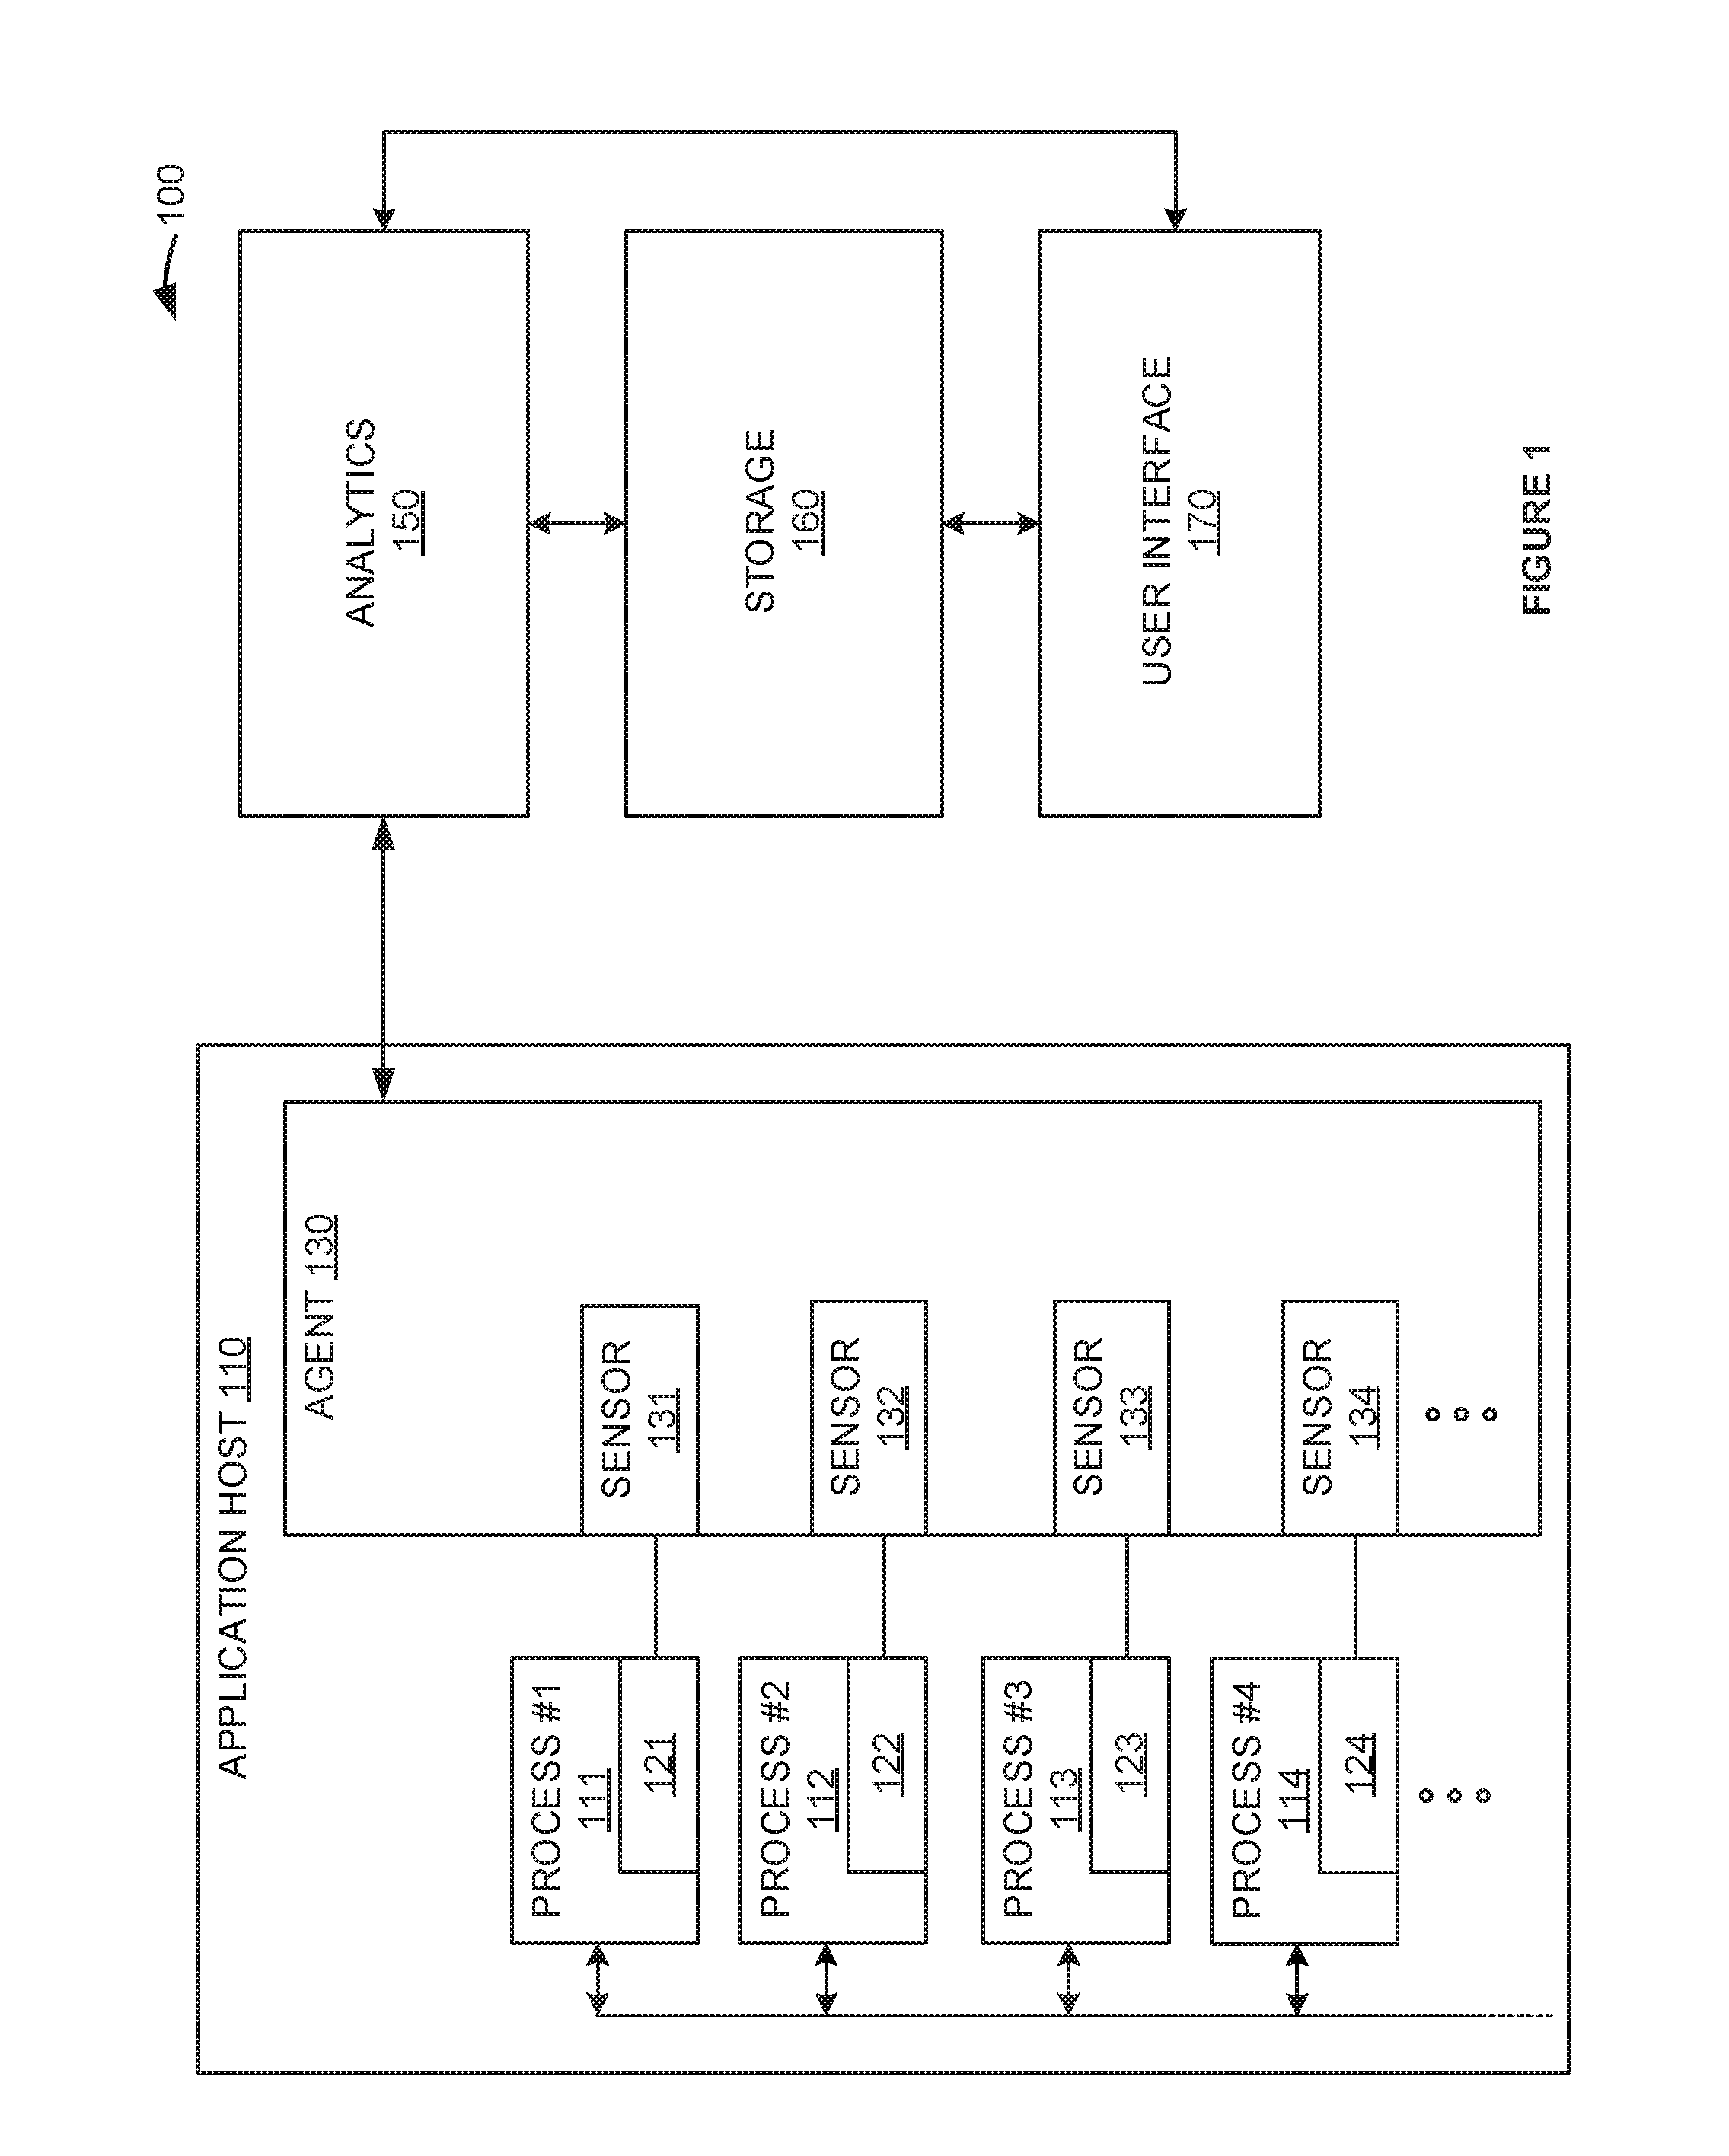 Hierarchical fault determination in an application performance management system